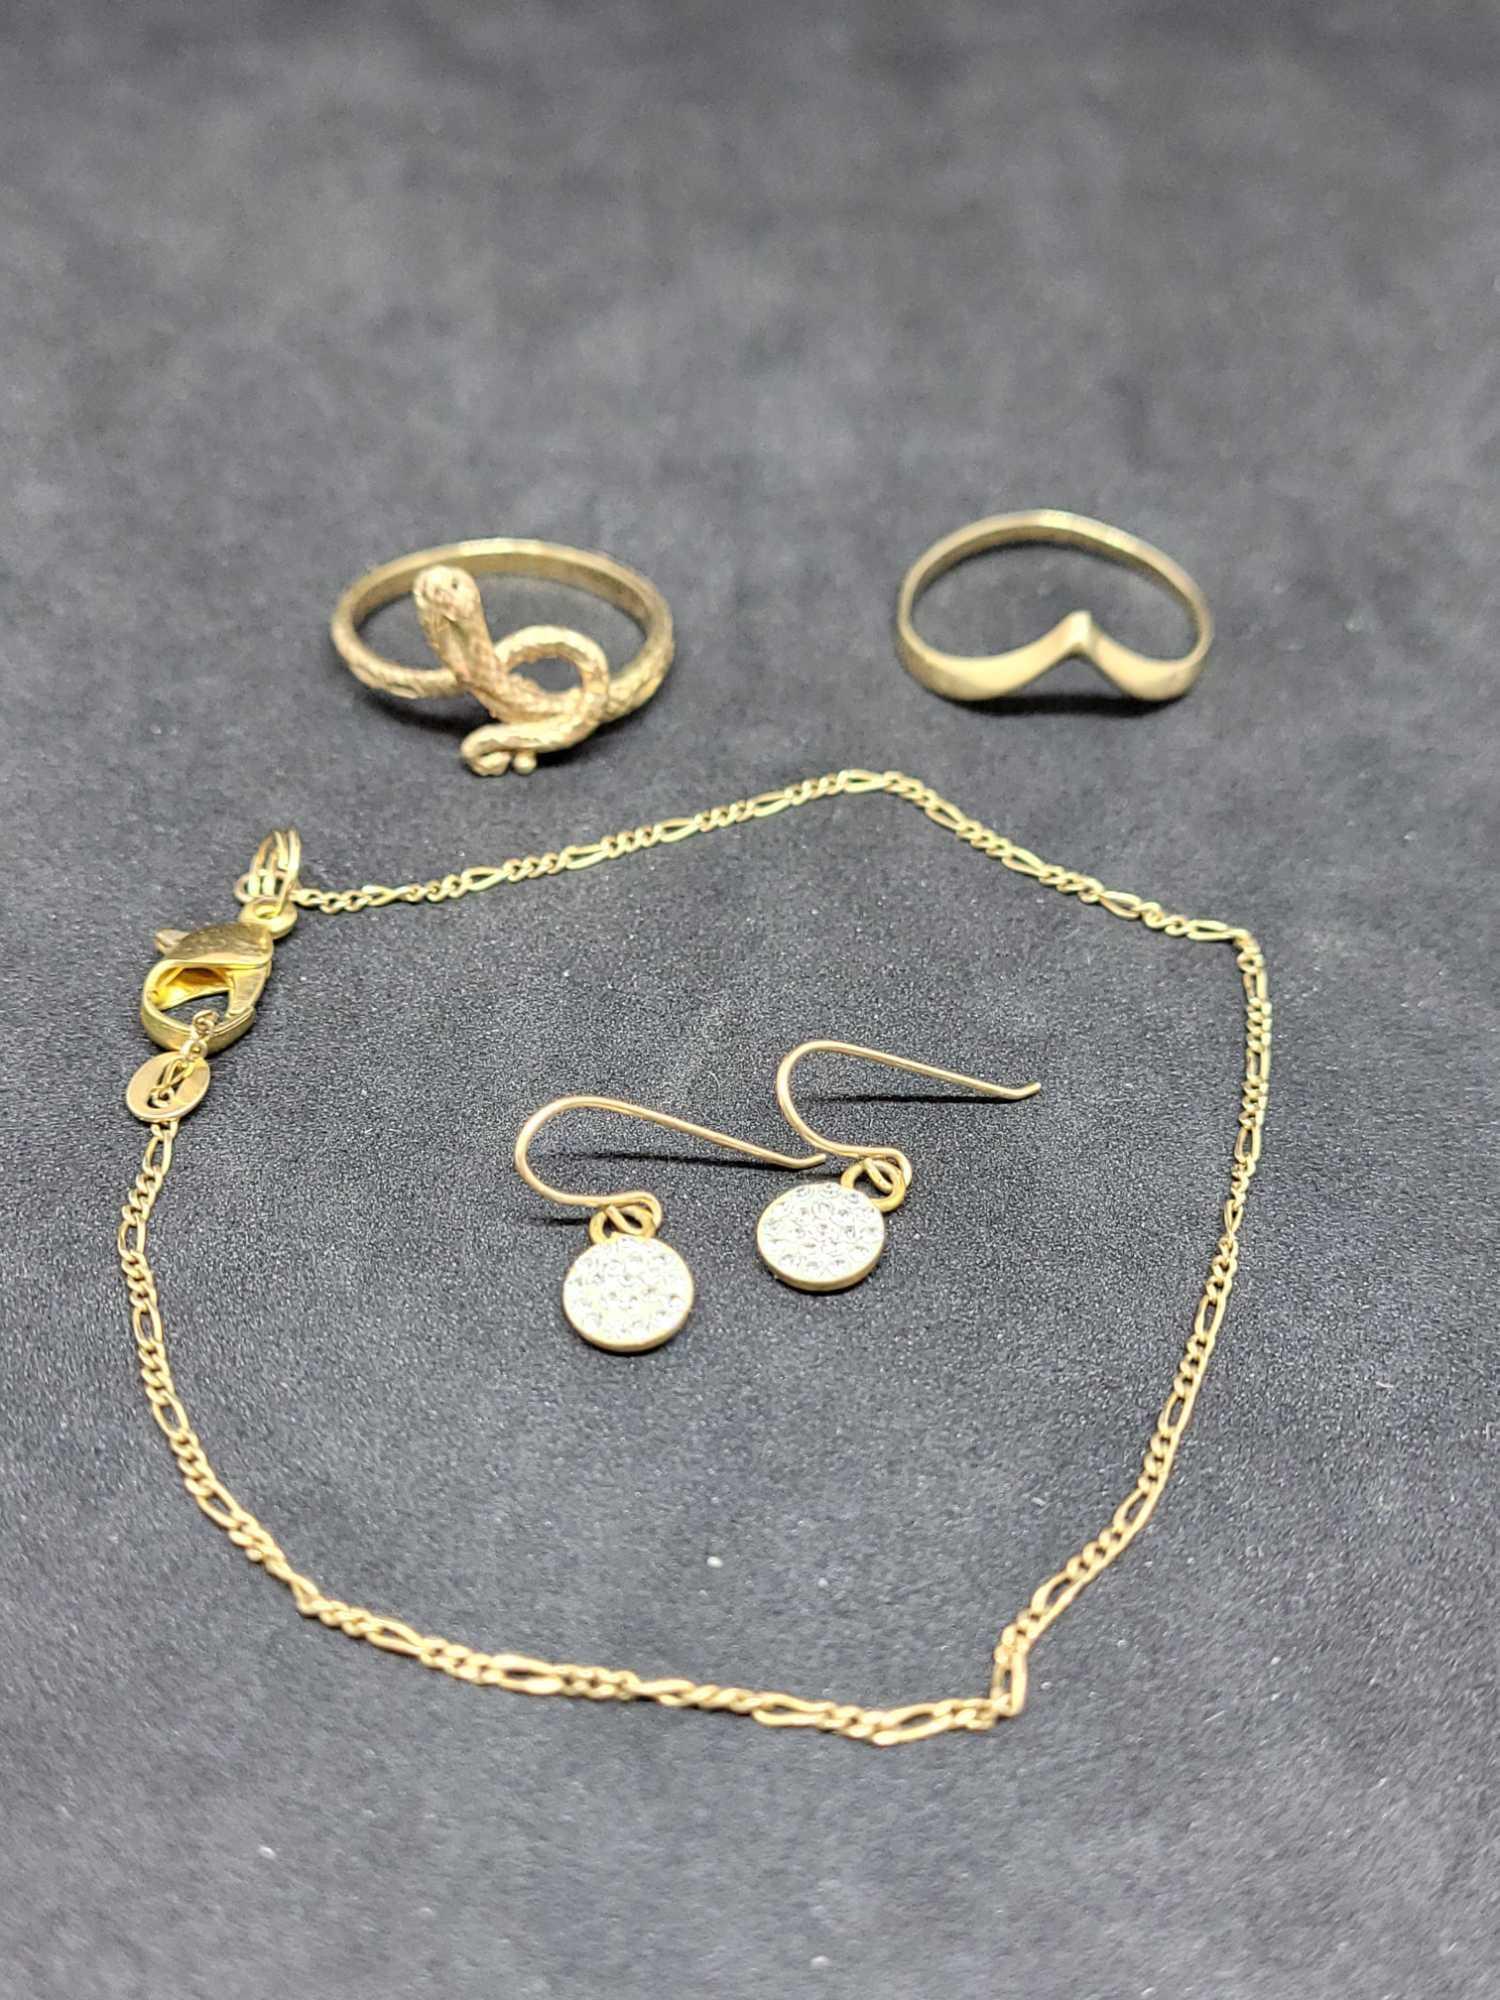 14kt gold jewelry 2 ring, earrings, and bracelet